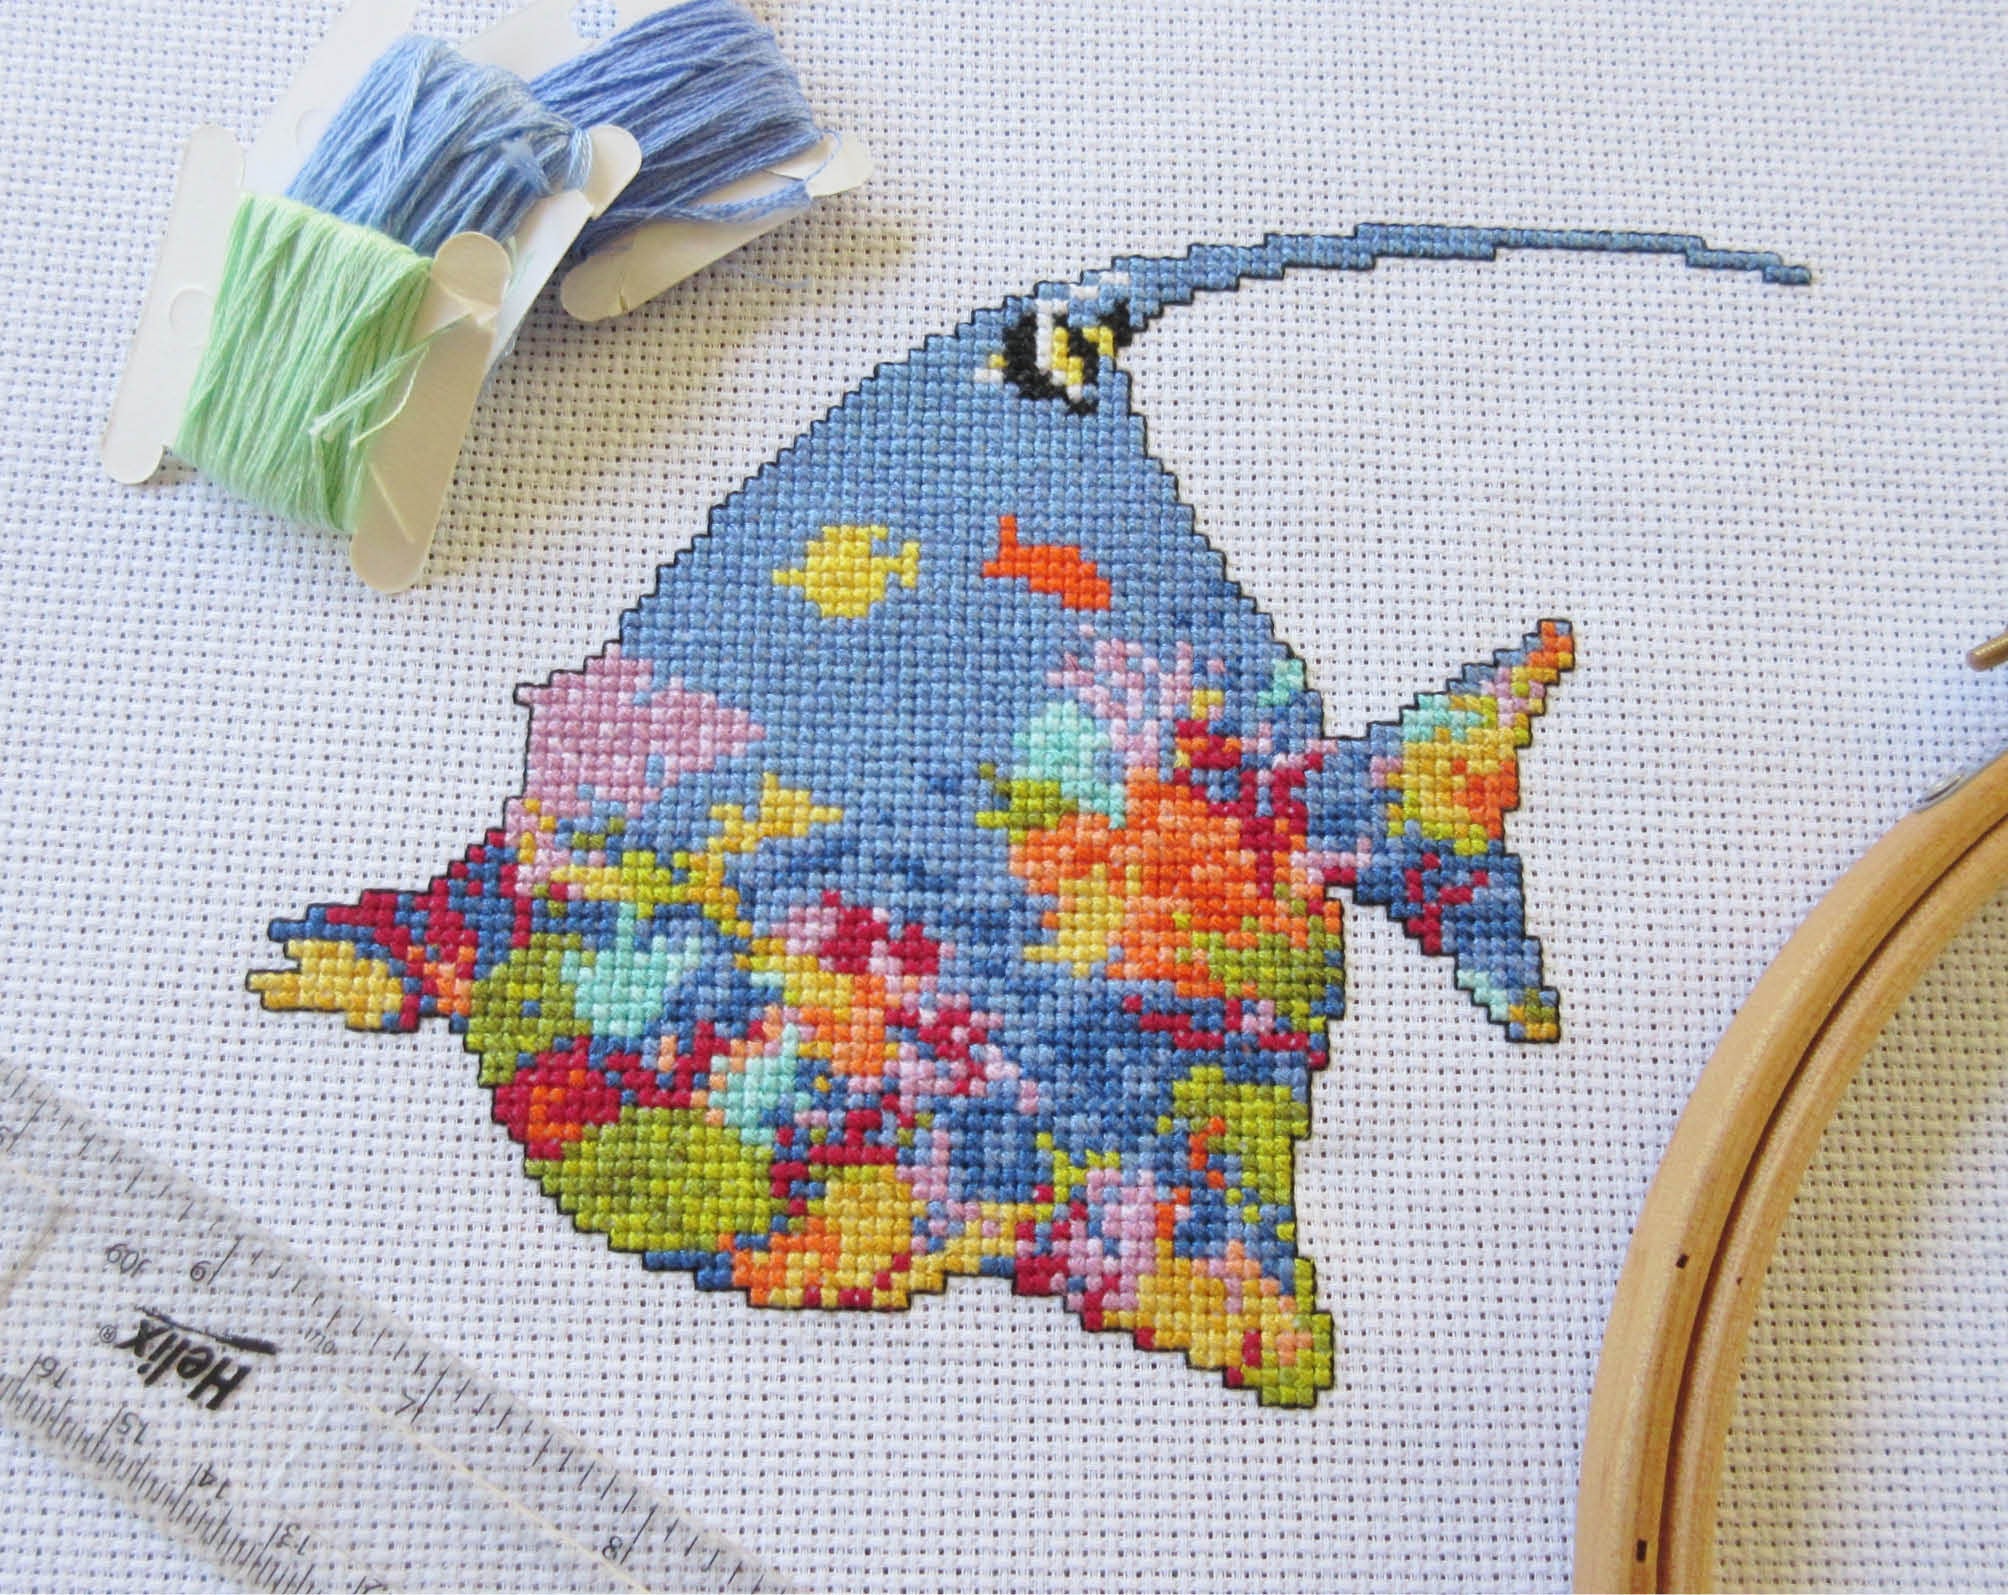 Cross stitch pattern of the silhouette of a tropical fish (a moorish idol fish) filled with a scene of a coral reef. Stitched piece with props.